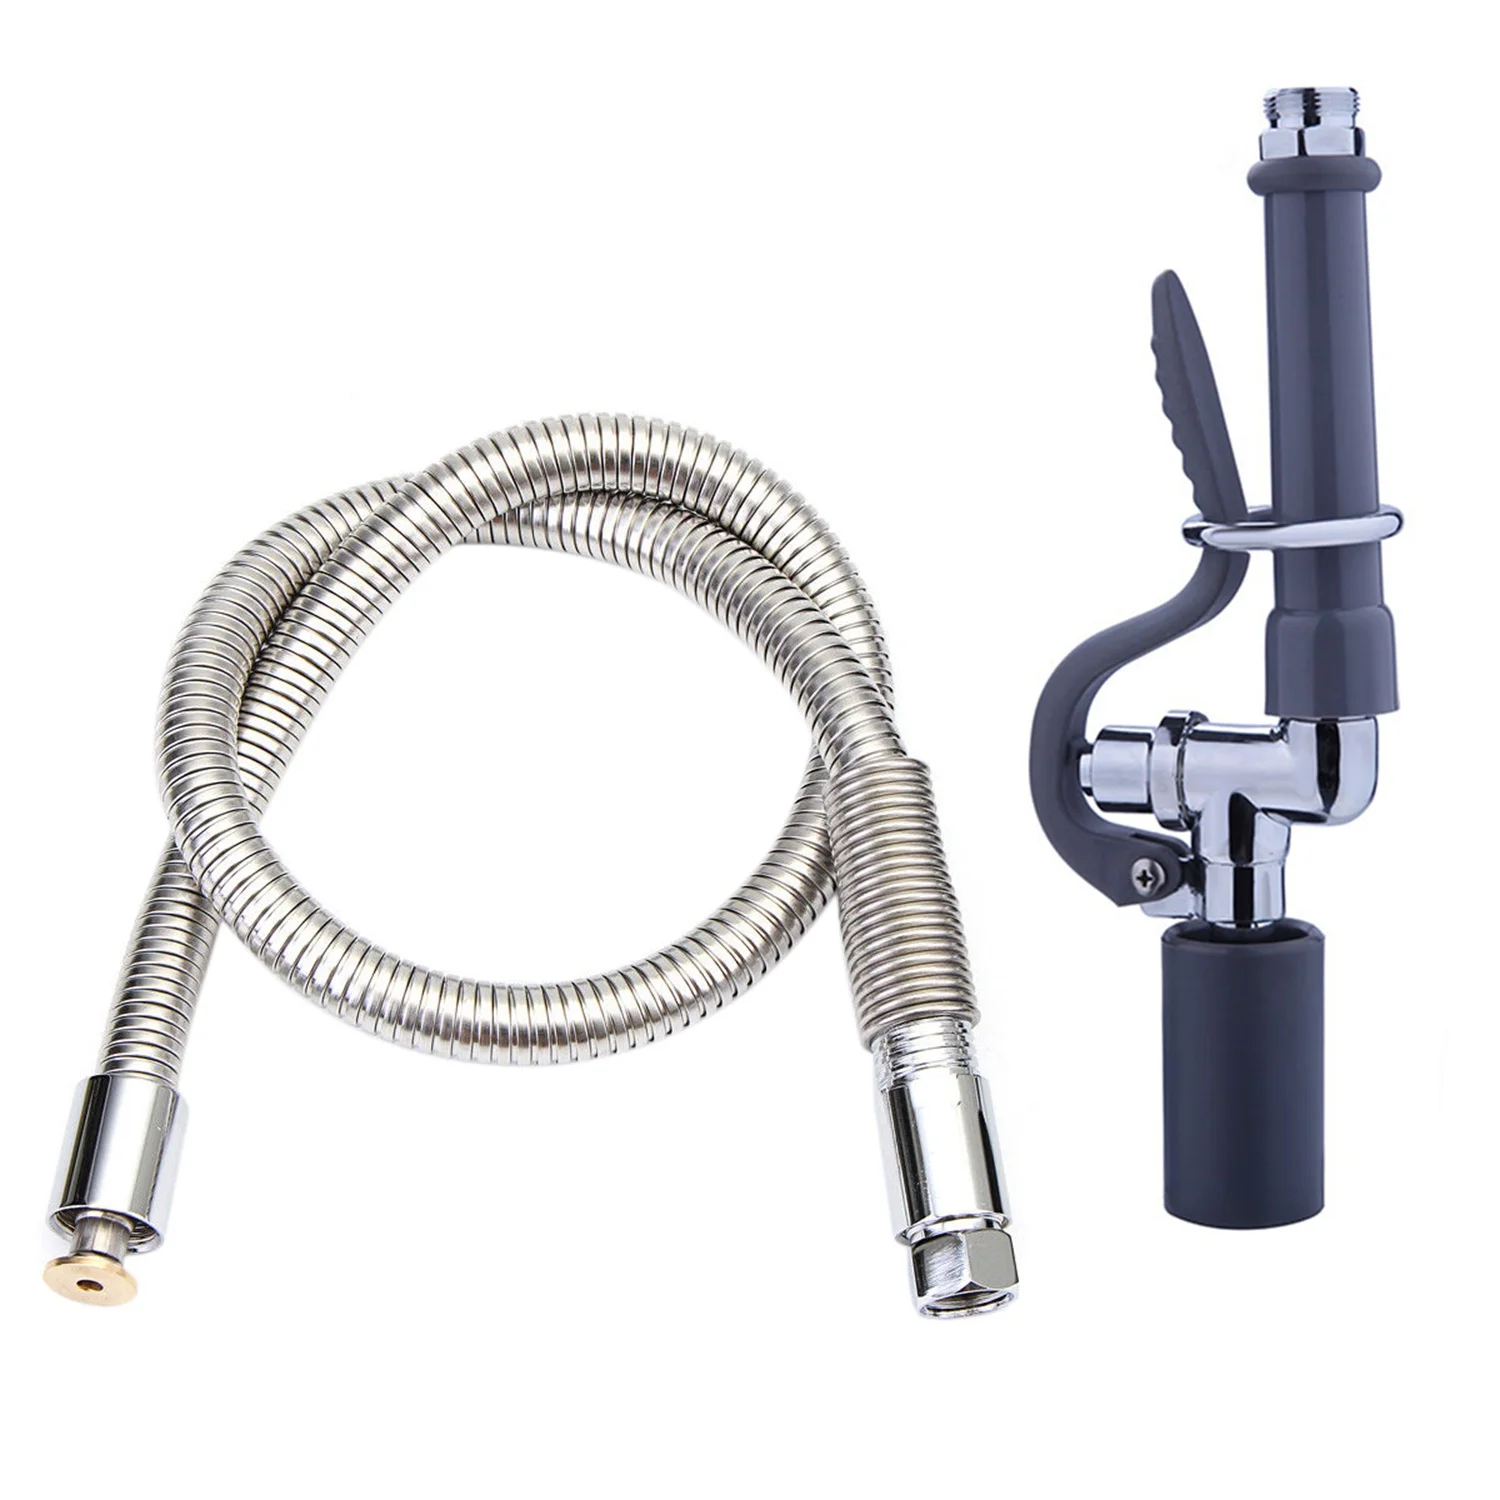  Promotion Commercial Kitchen Prerinse Faucet Tap Spray Head Sprayer With Flexible Hose - 32989335138